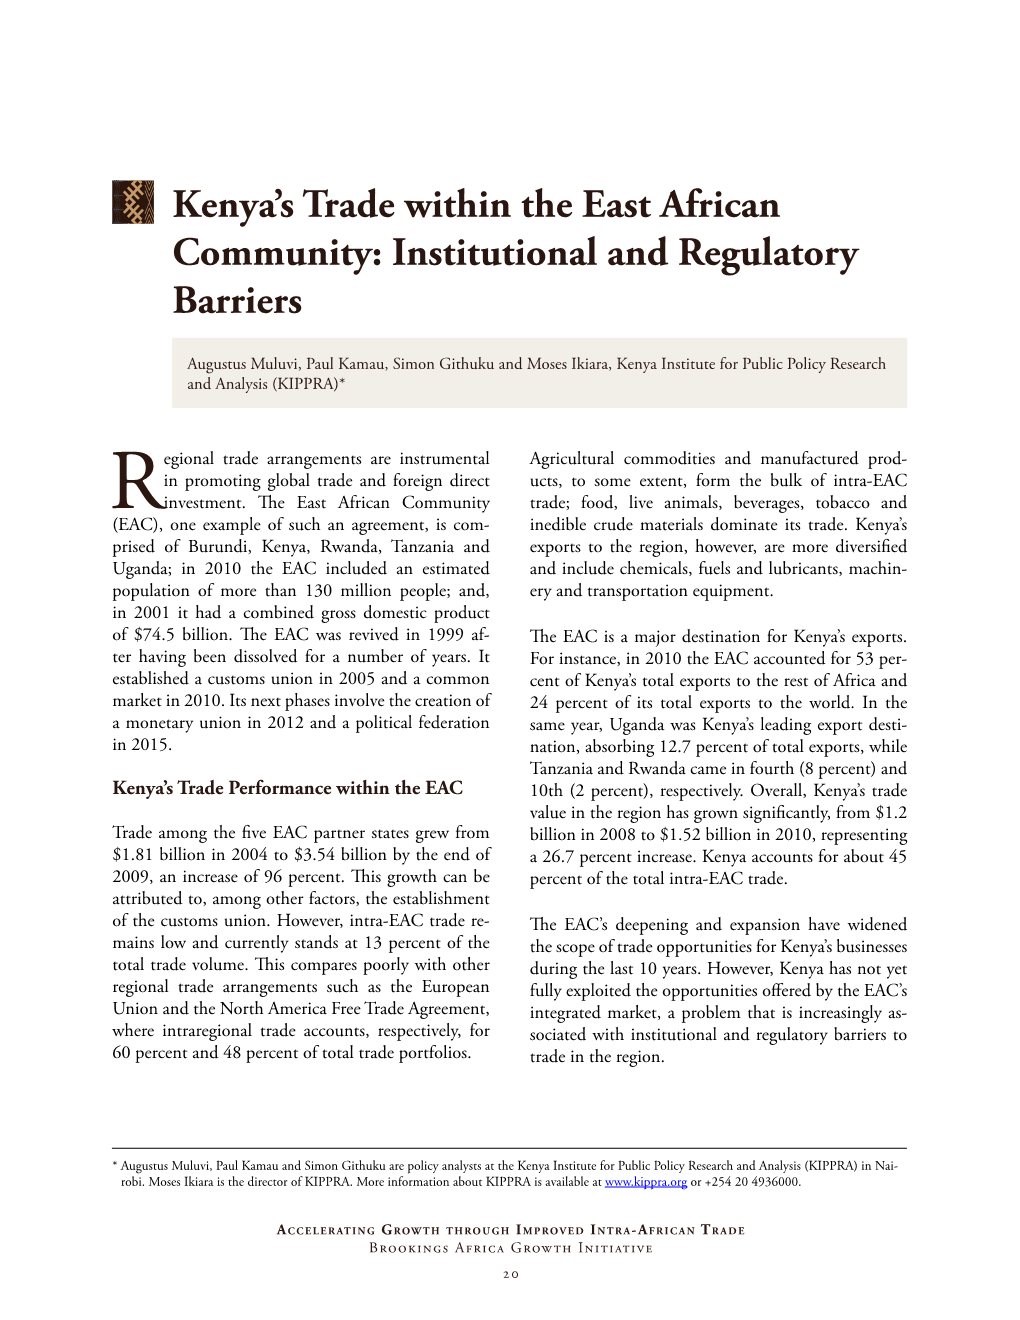 Kenya's Trade Within the East African Community